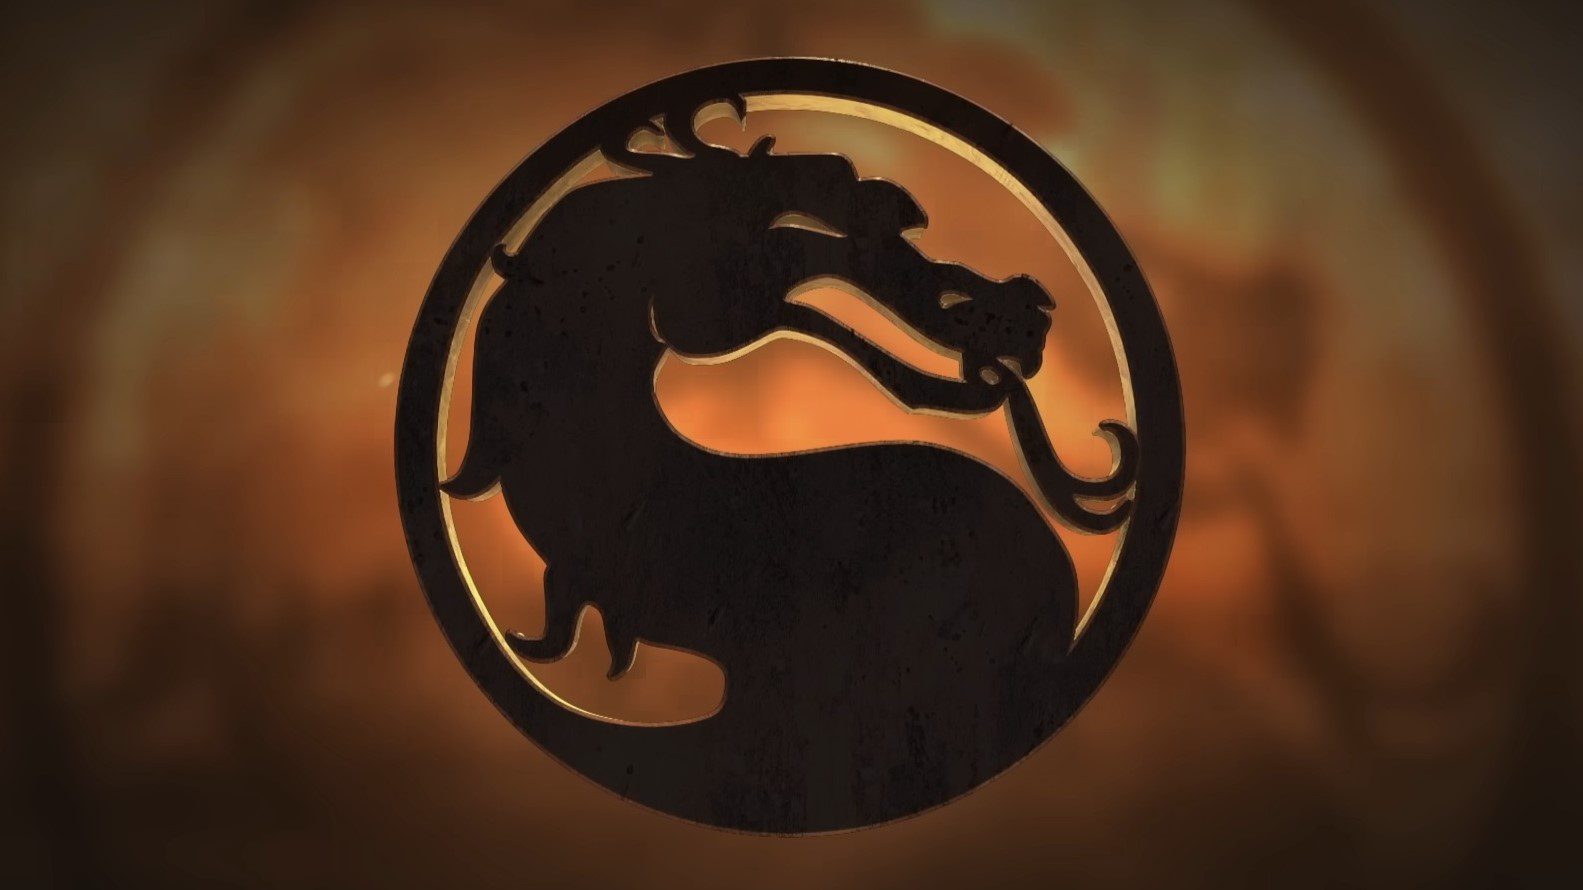 Here's the first trailer for the new Mortal Kombat movie